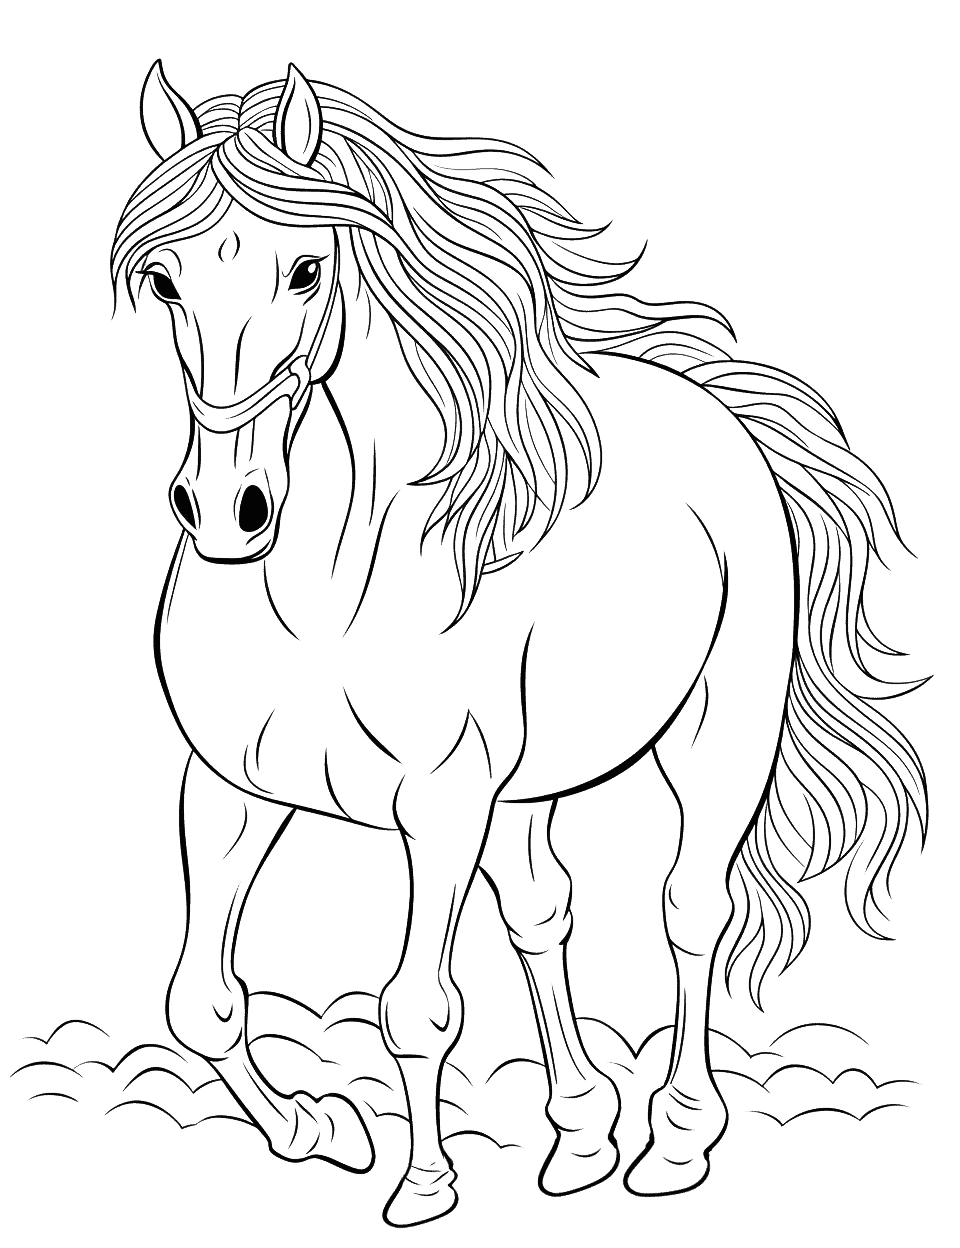 Detailed Stallion Portrait Horse Coloring Page - A detailed portrait of a majestic stallion, great for older kids who want a challenge.